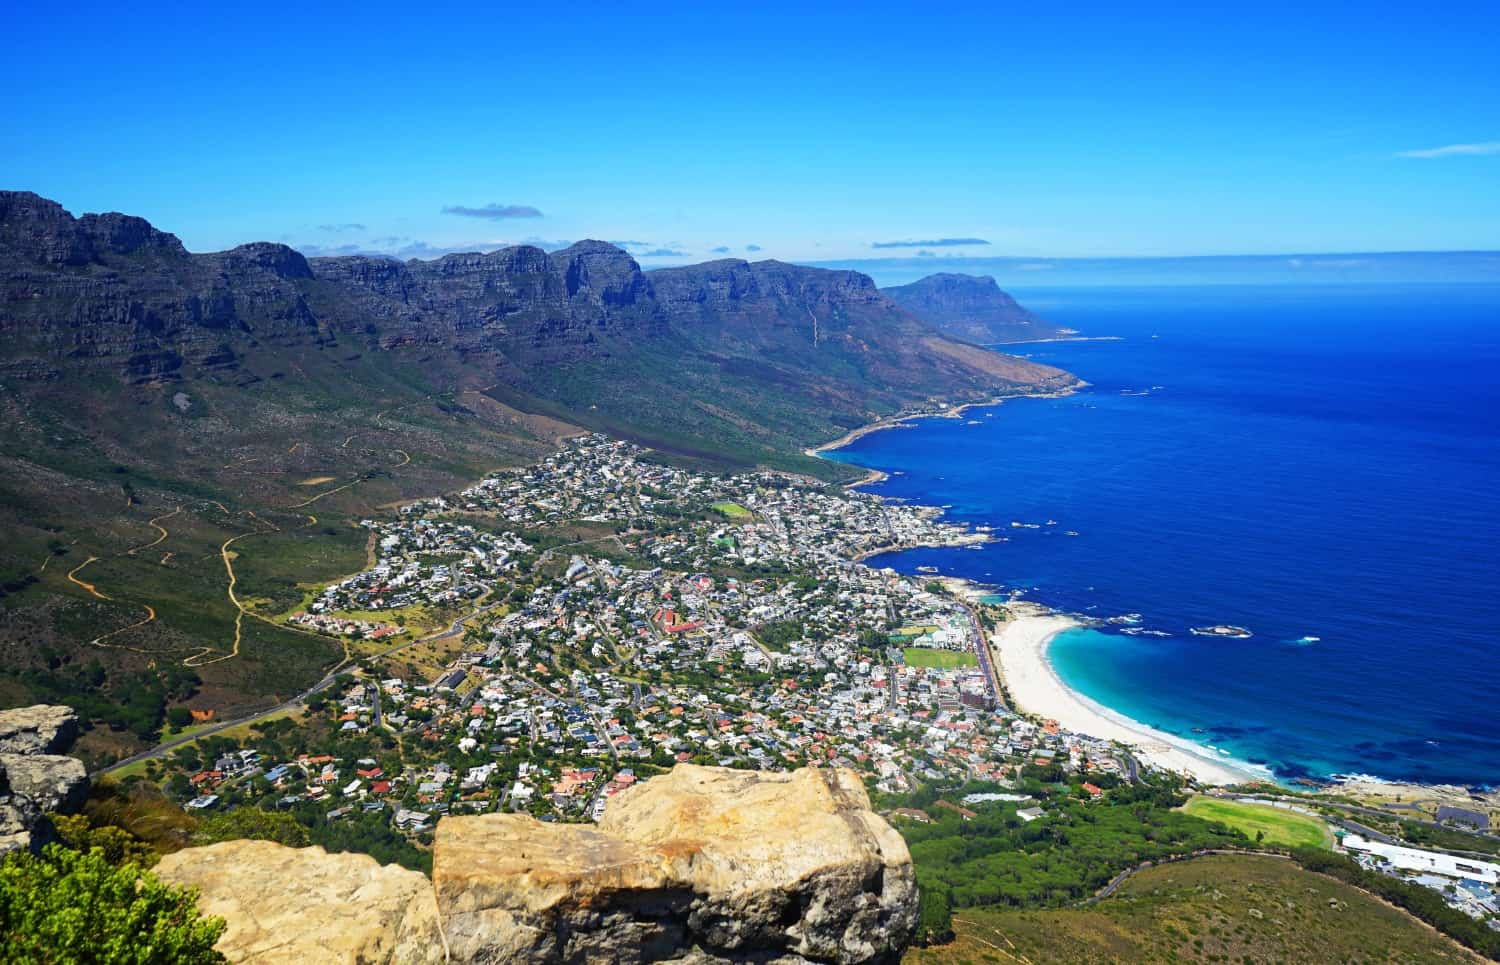 8 Reasons Why I Fell in Love With Cape Town | Never Ending Footsteps